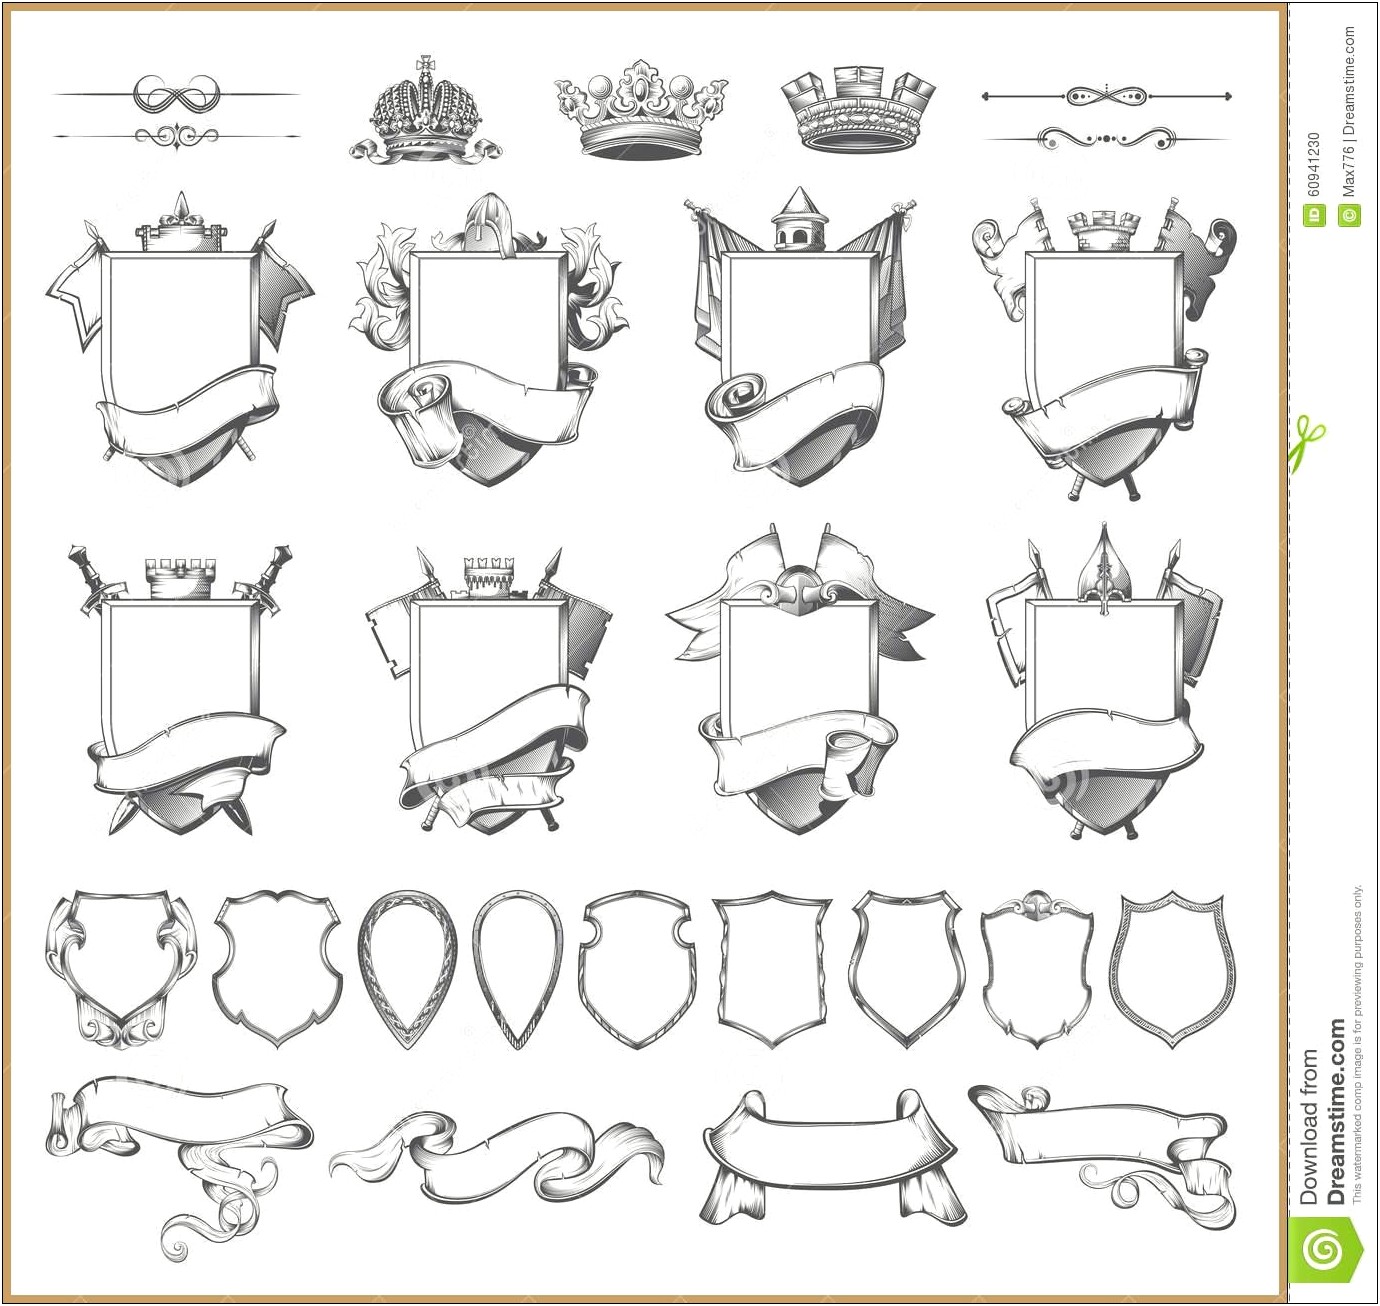 Coat Of Arms Printable Template Free